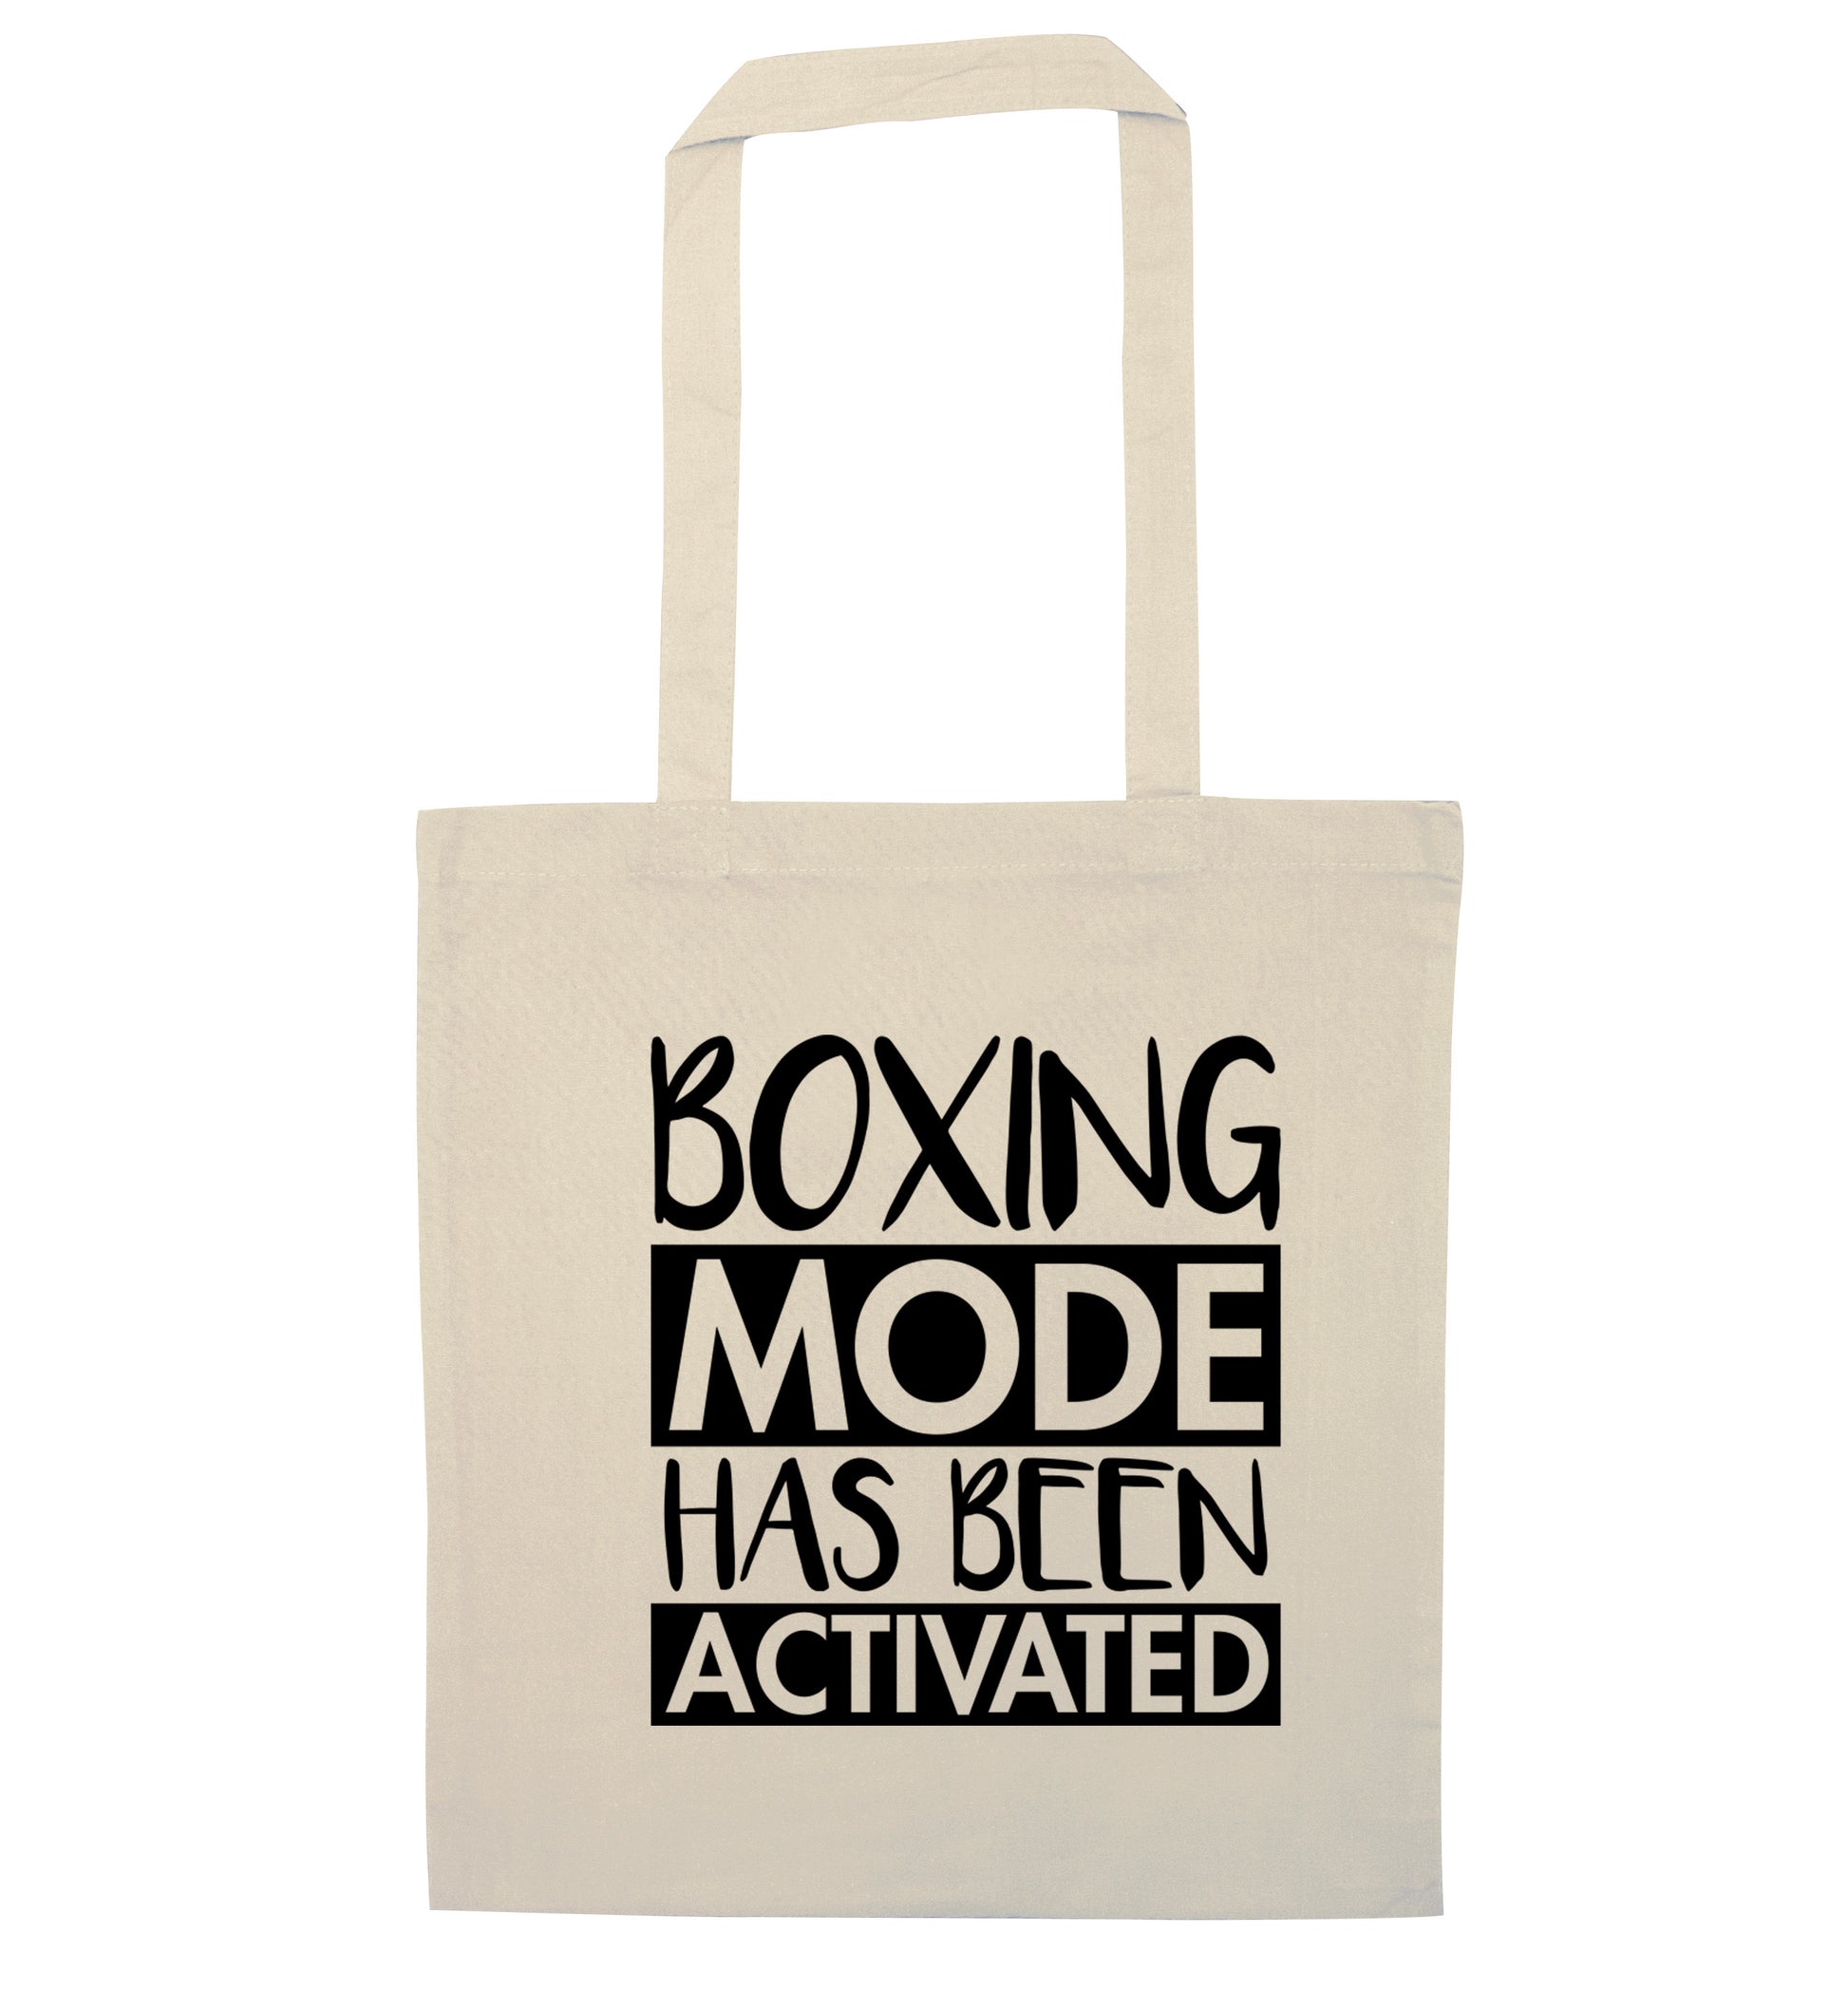 Boxing mode activated natural tote bag